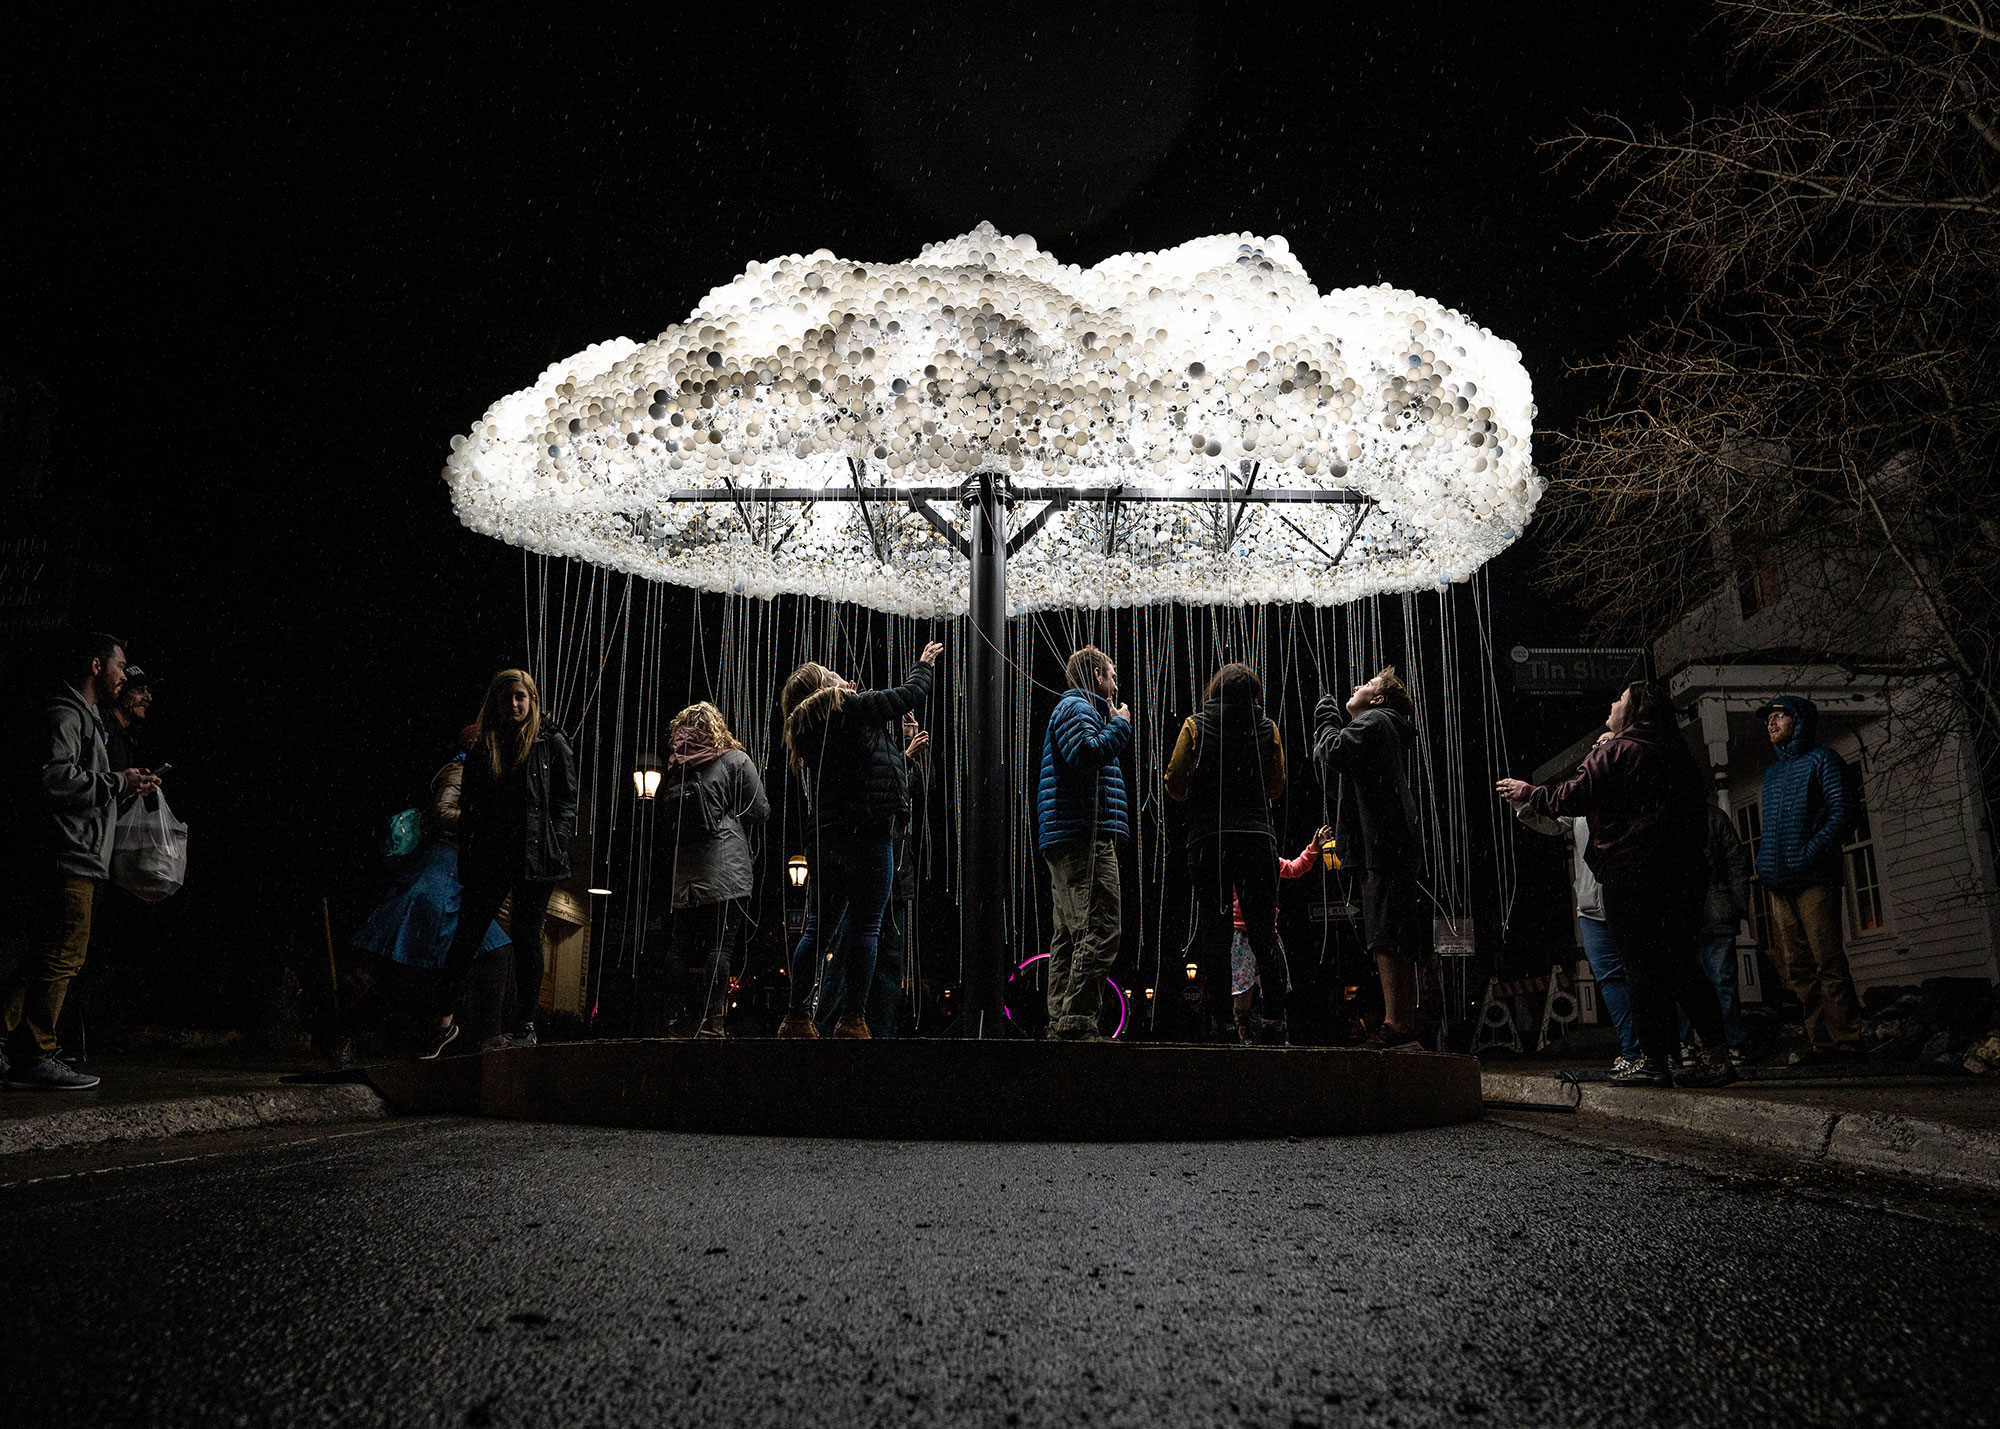 Interactive art installation in shape of a cloud